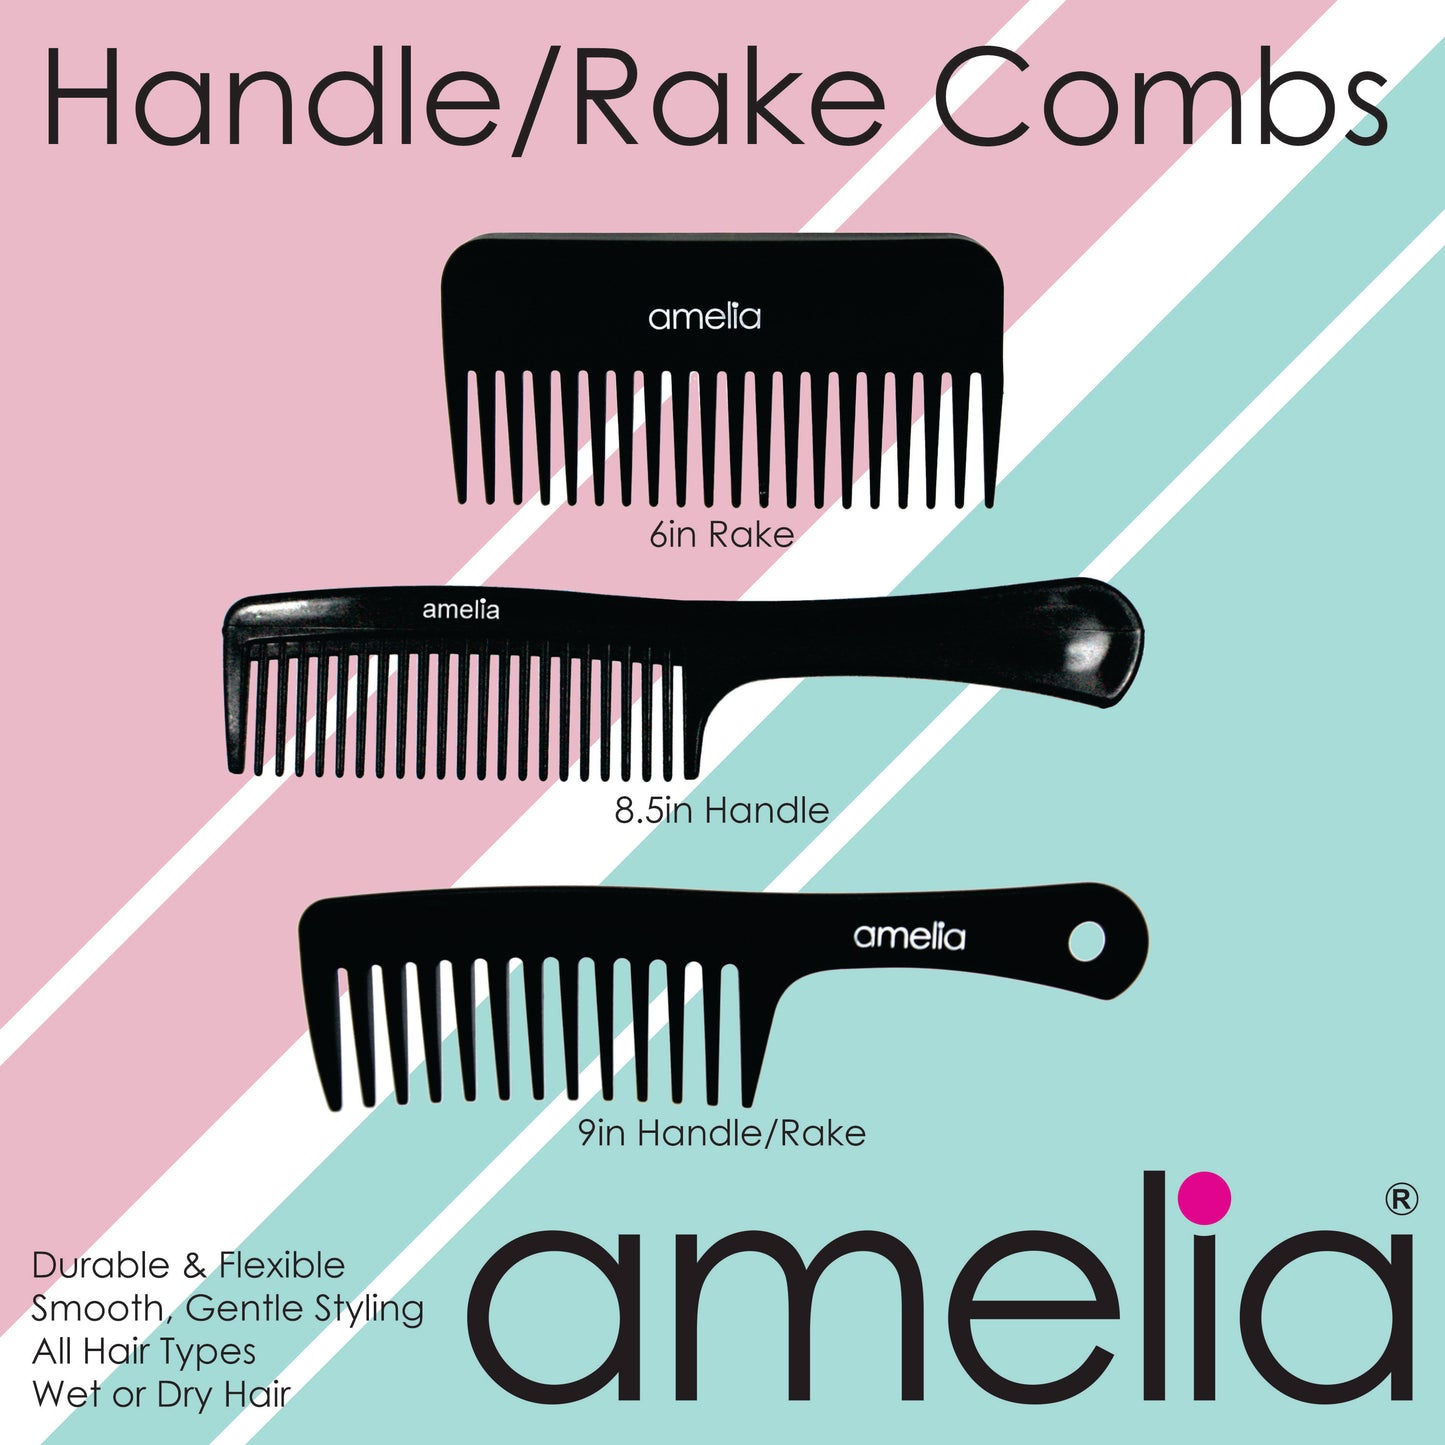 Amelia Beauty,6in Black Plastic Detangling Rake Comb, Made in USA, Professional Grade Comb,  Portable Salon Barber Shop Black Everyday Styling Rake Comb Hair Styling Tool, 6"x3.25", 2 Pack